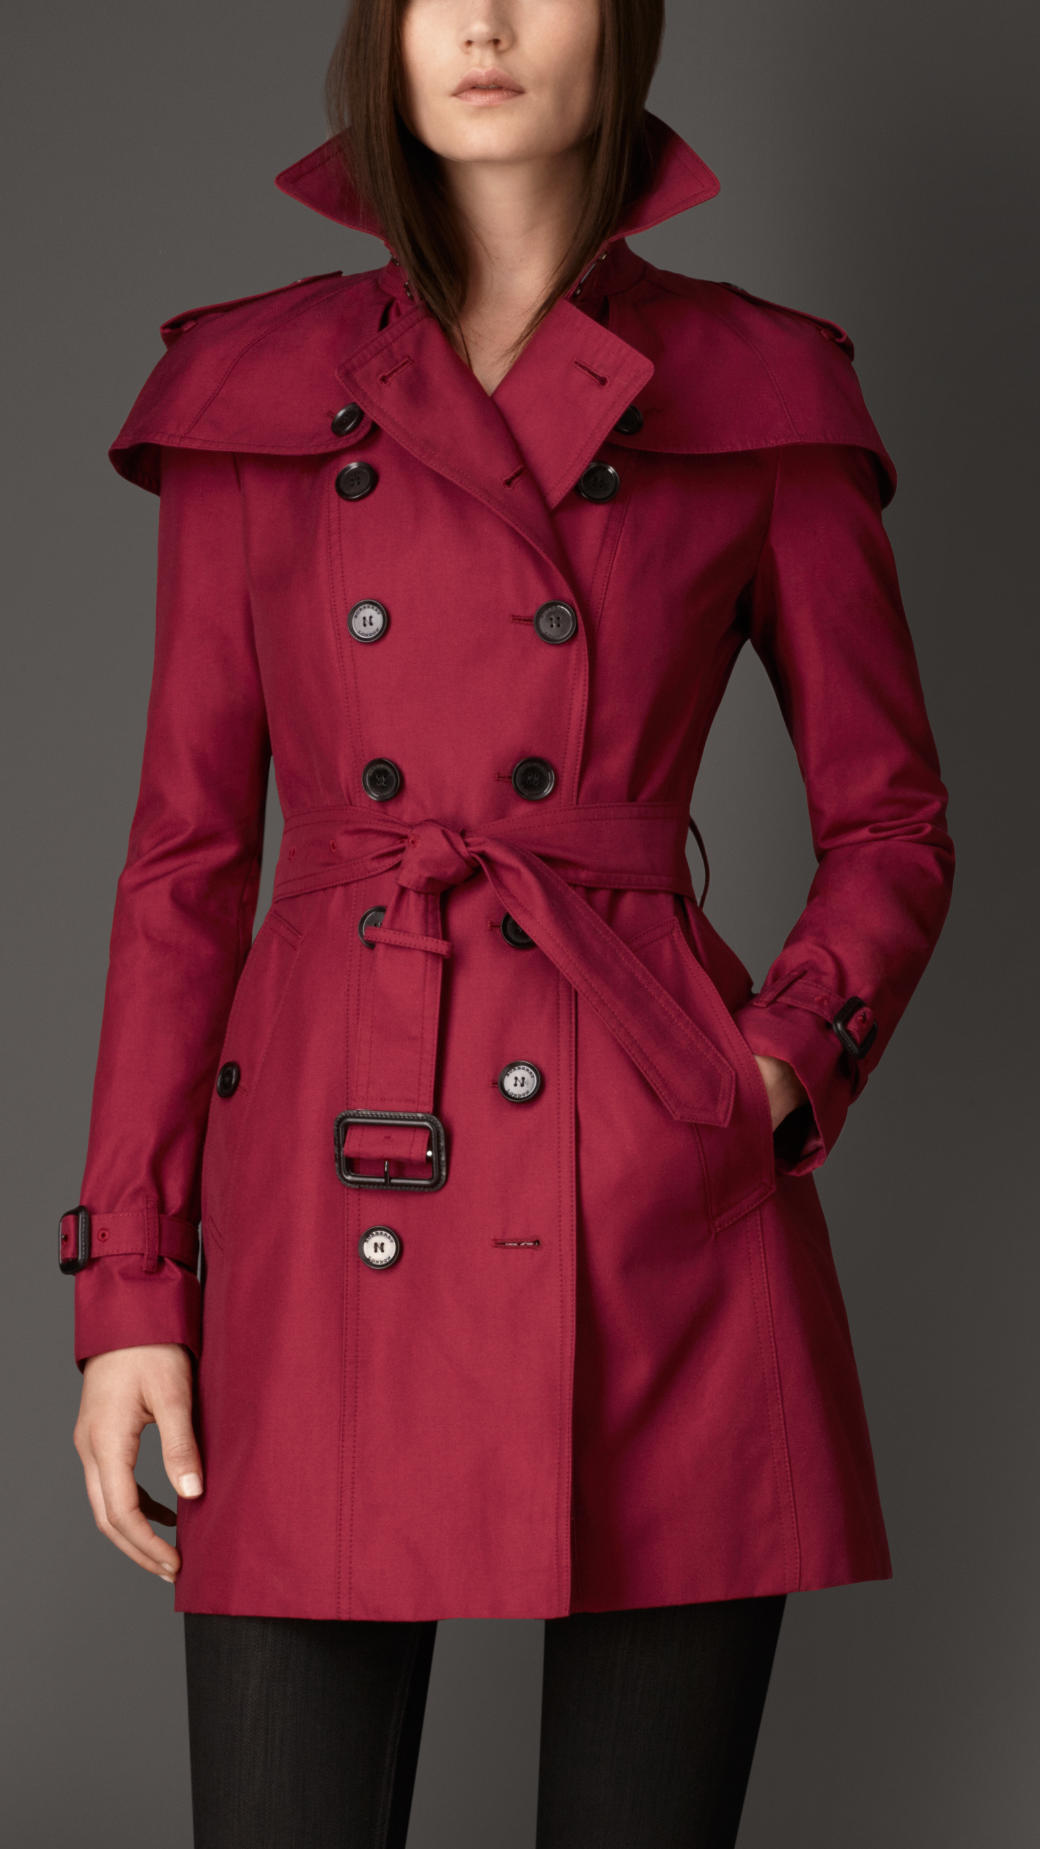 Lyst - Burberry Caped Gabardine Trench Coat in Red